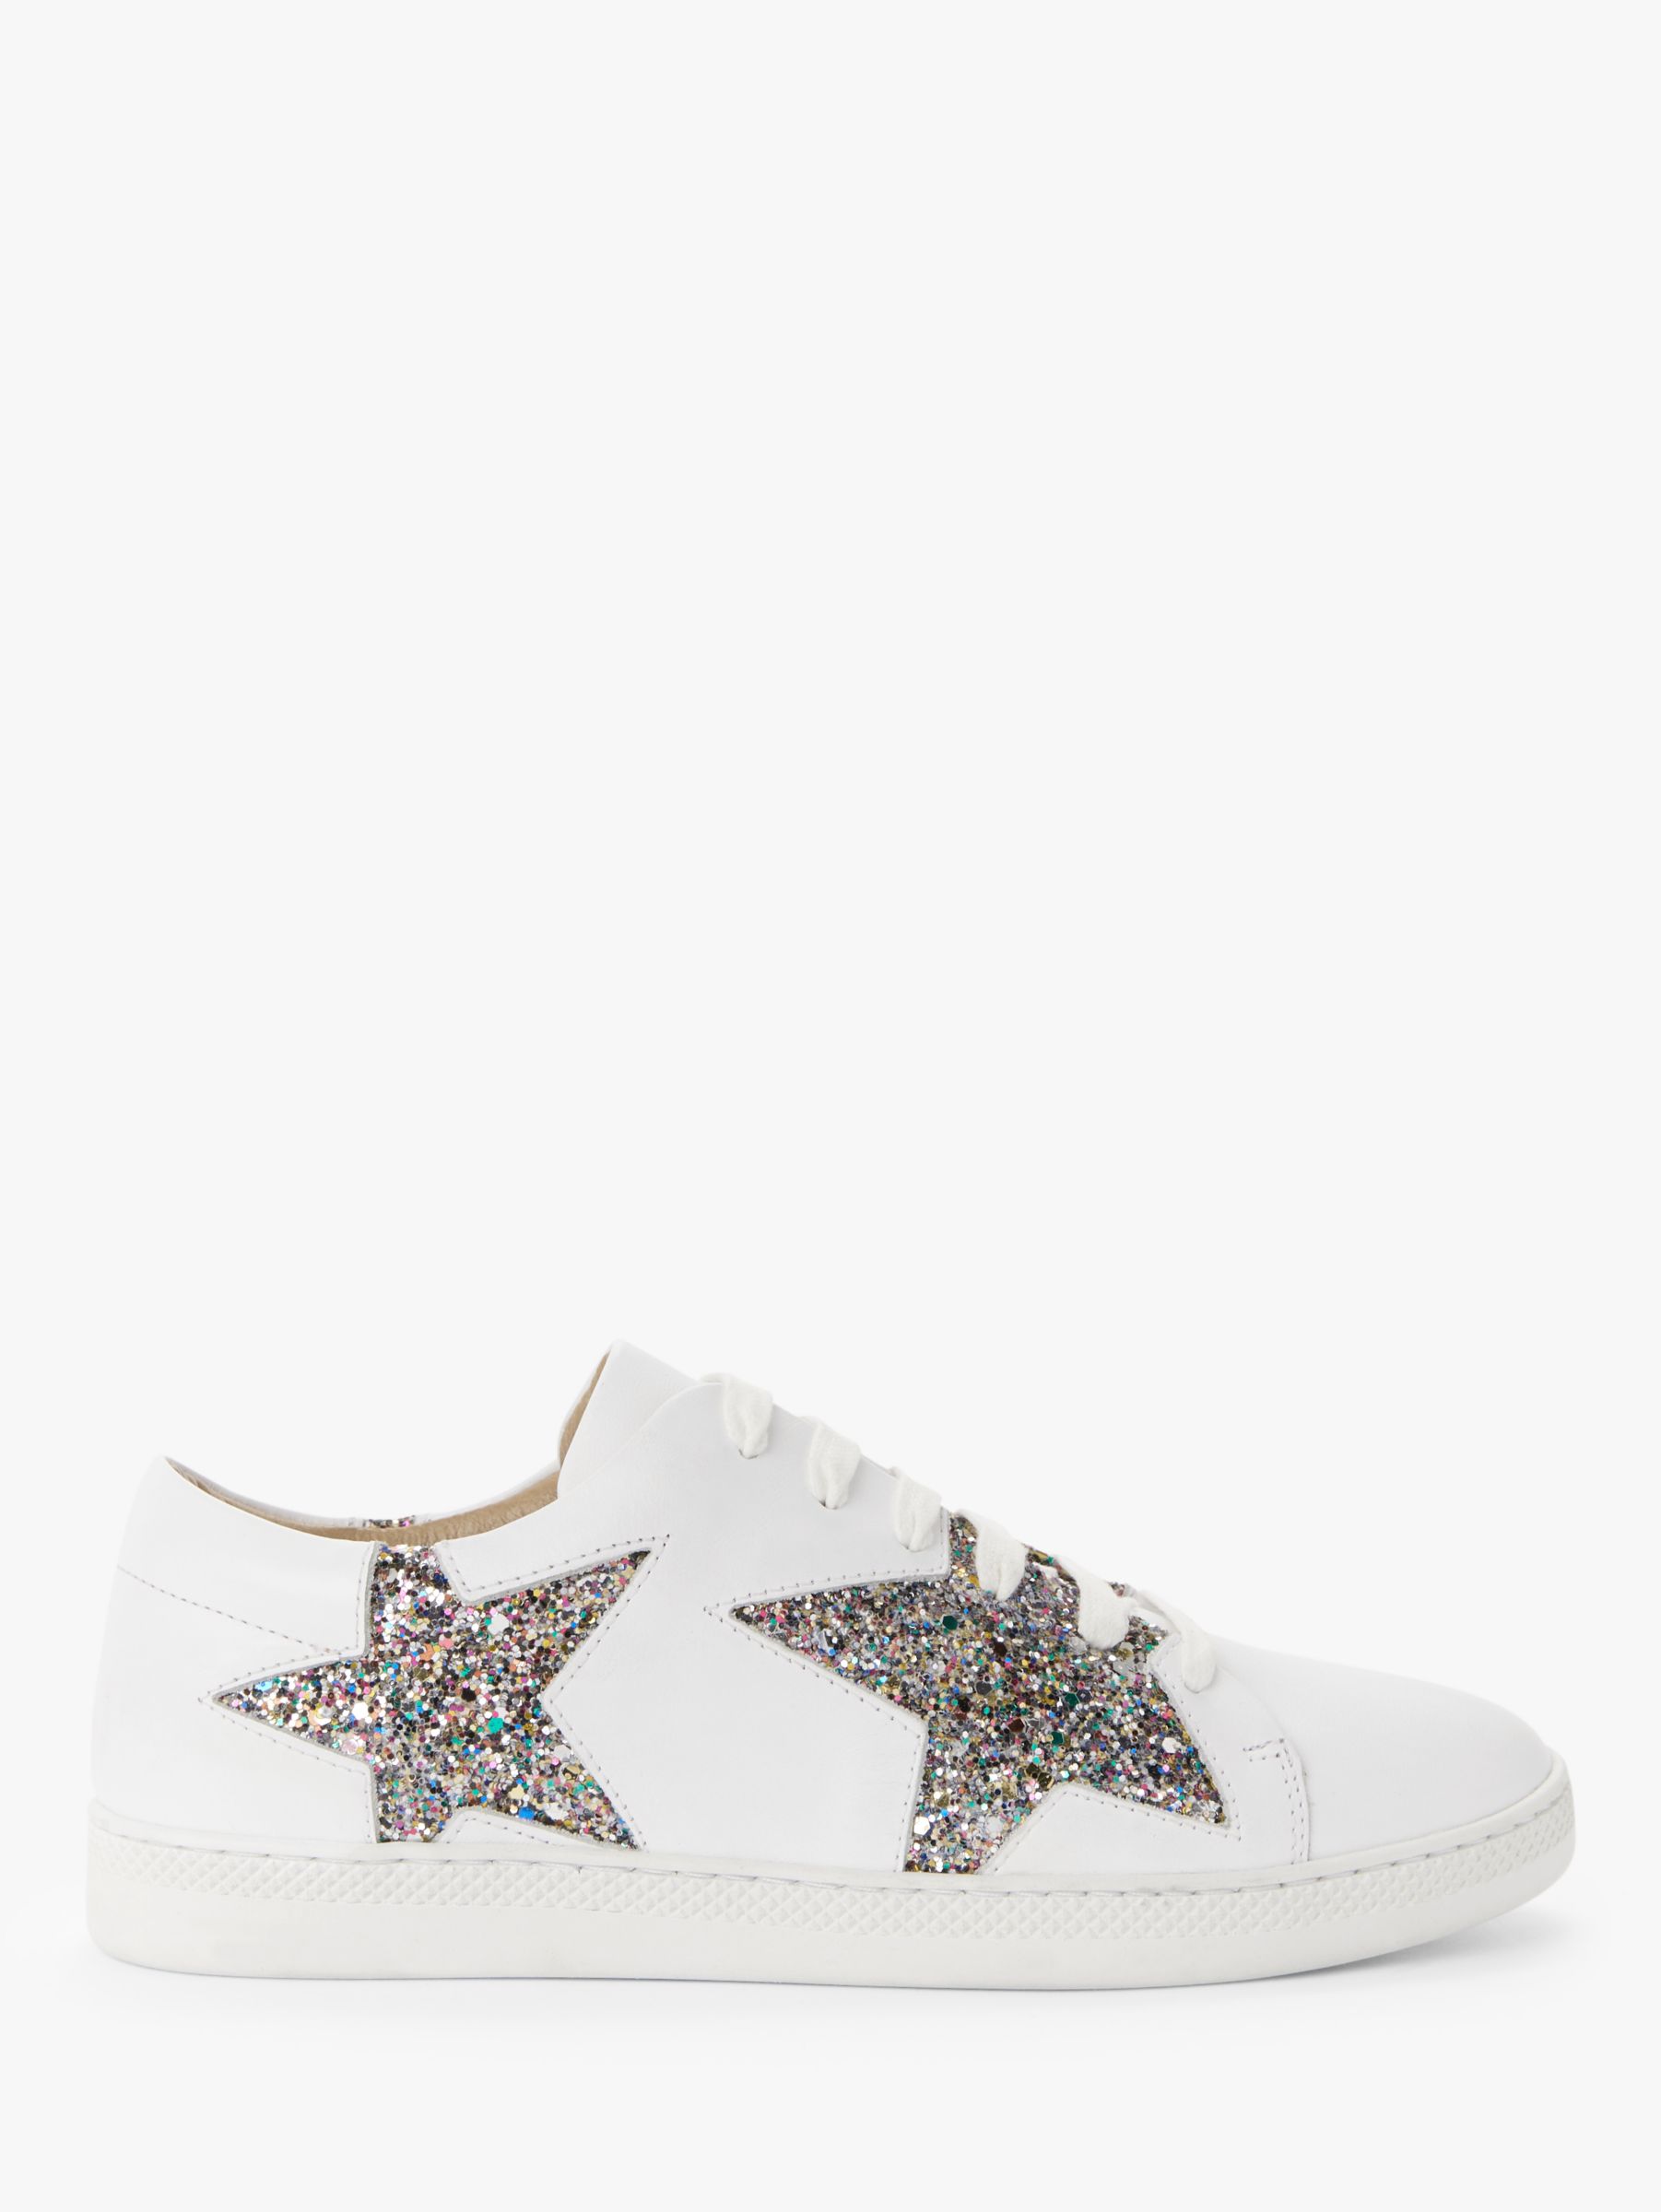 AND/OR Edie Star Trainers, White/Multi Glitter